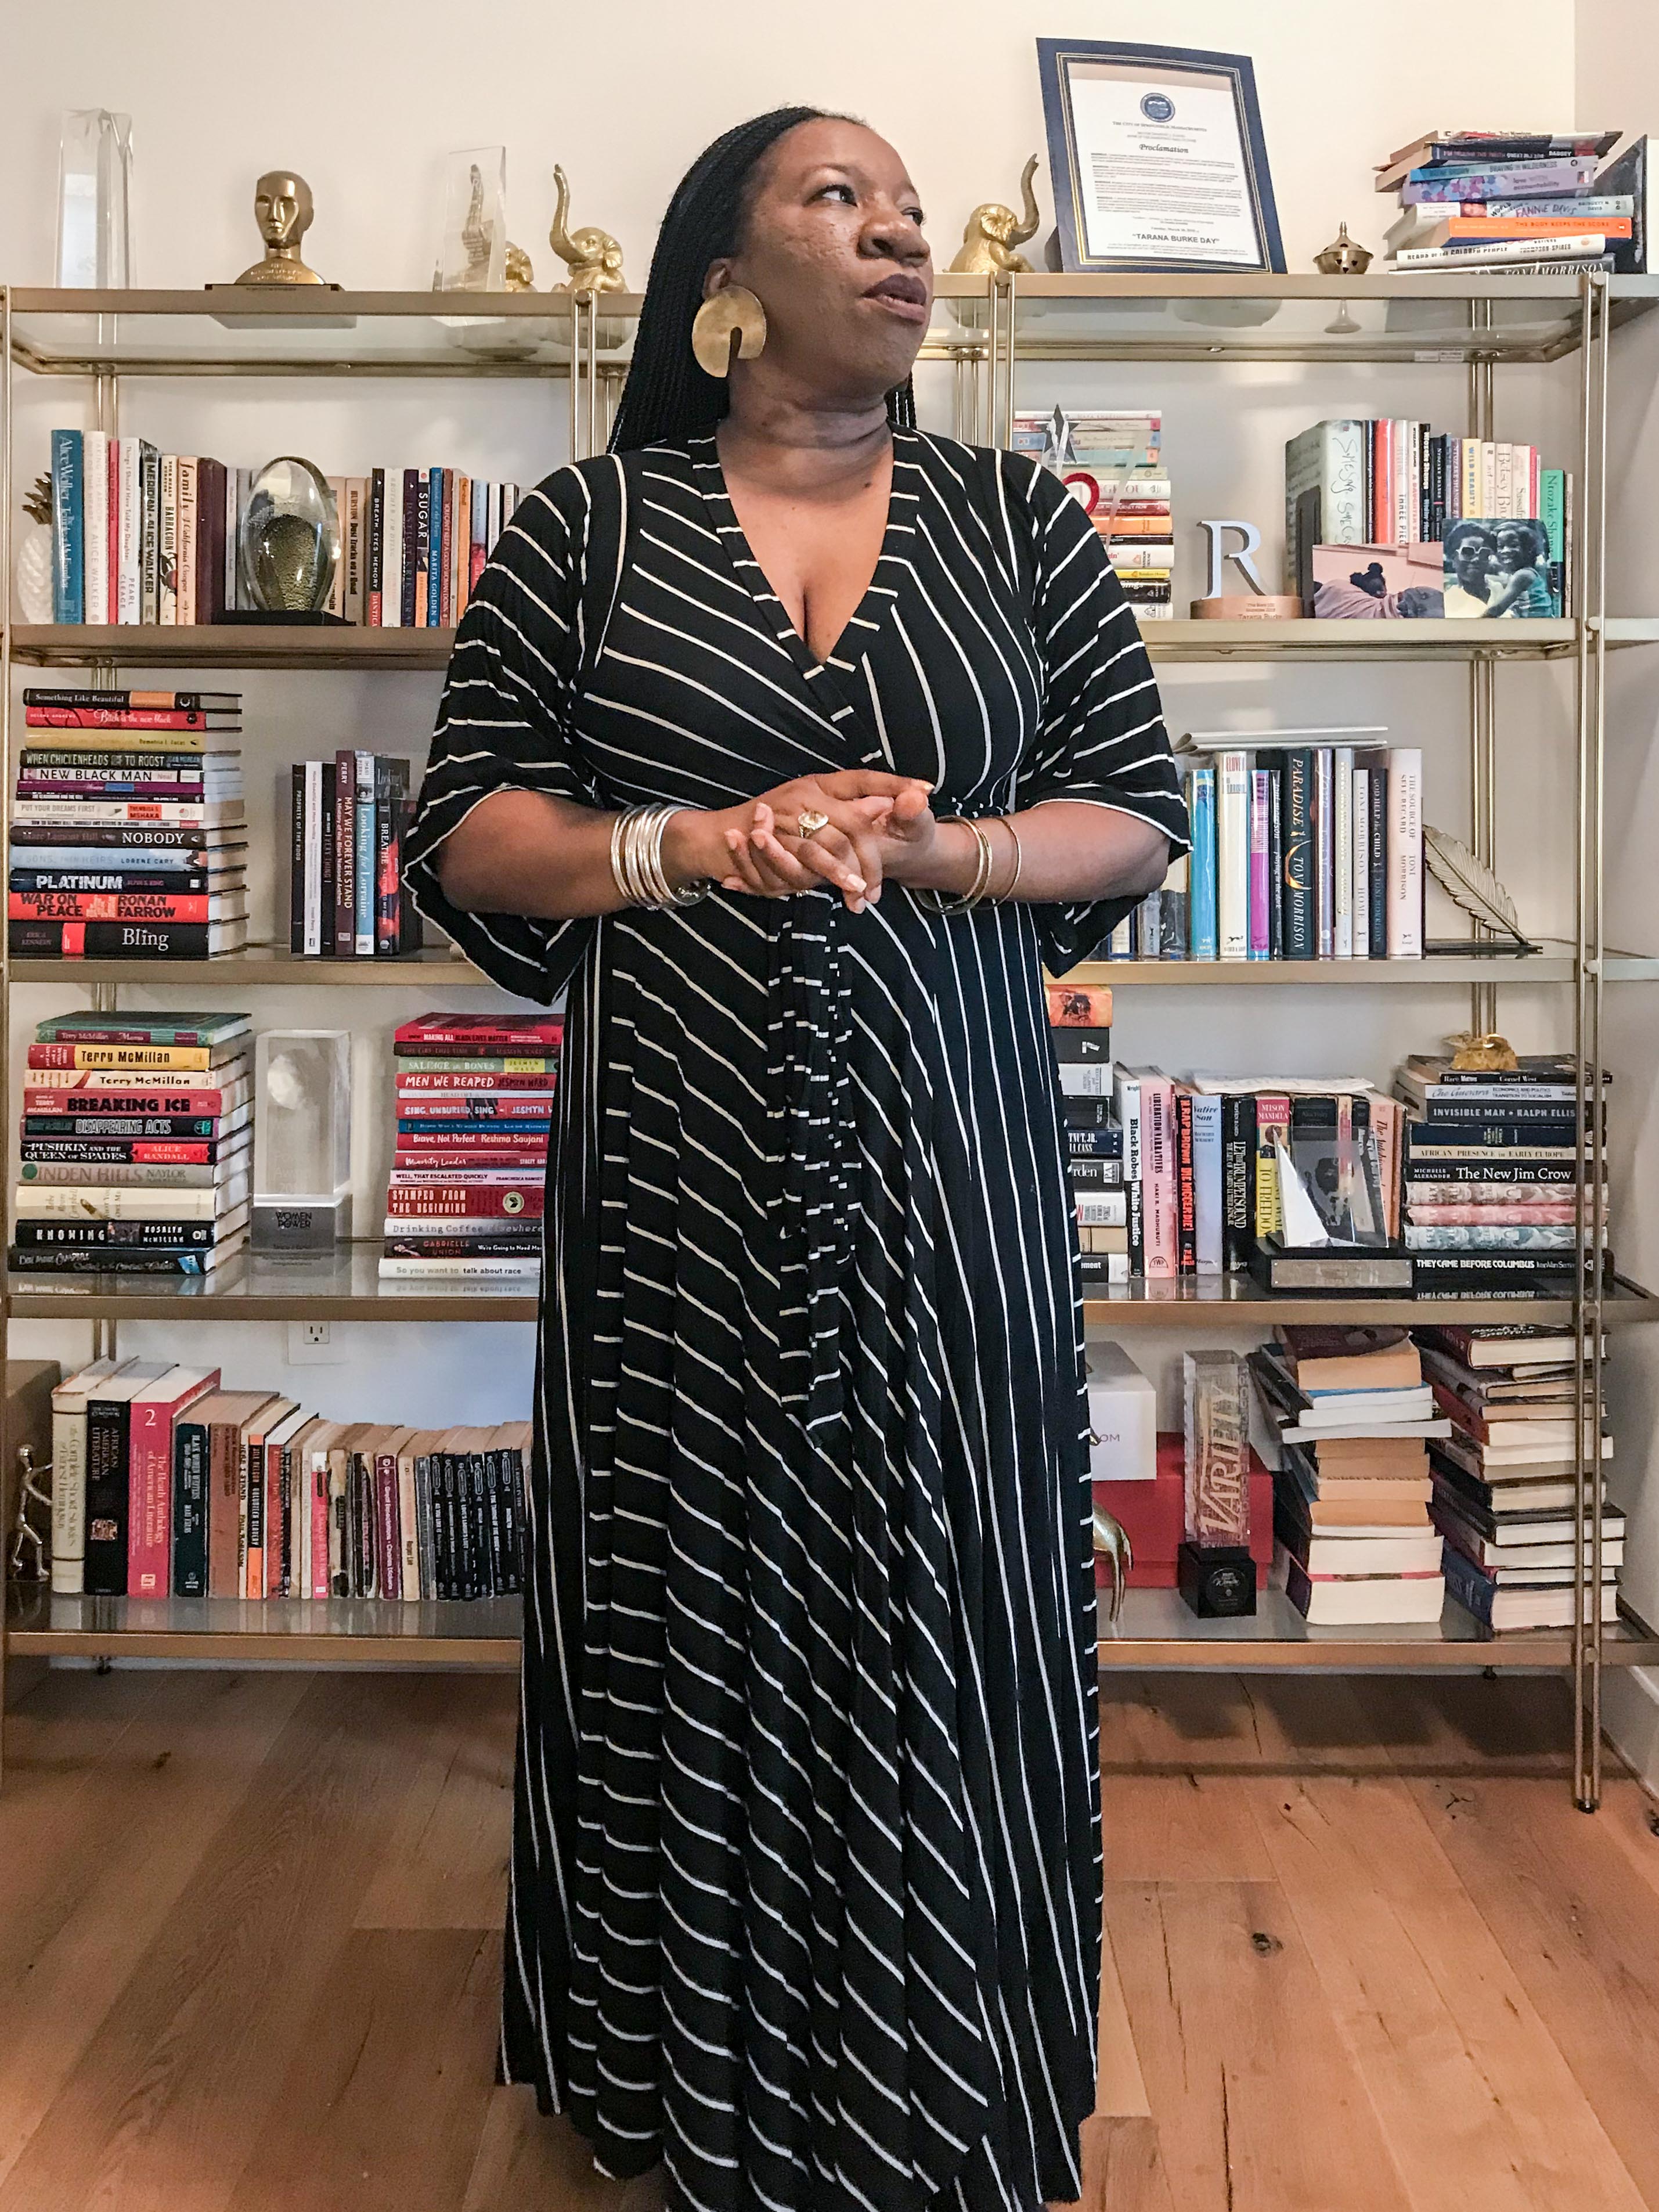 Tarana Burke says her journey is ongoing. Kaia Burke, 22, took this picture of her mother at home in Harlem, N.Y., under the direction of USA TODAY photographer Hannah Gaber.